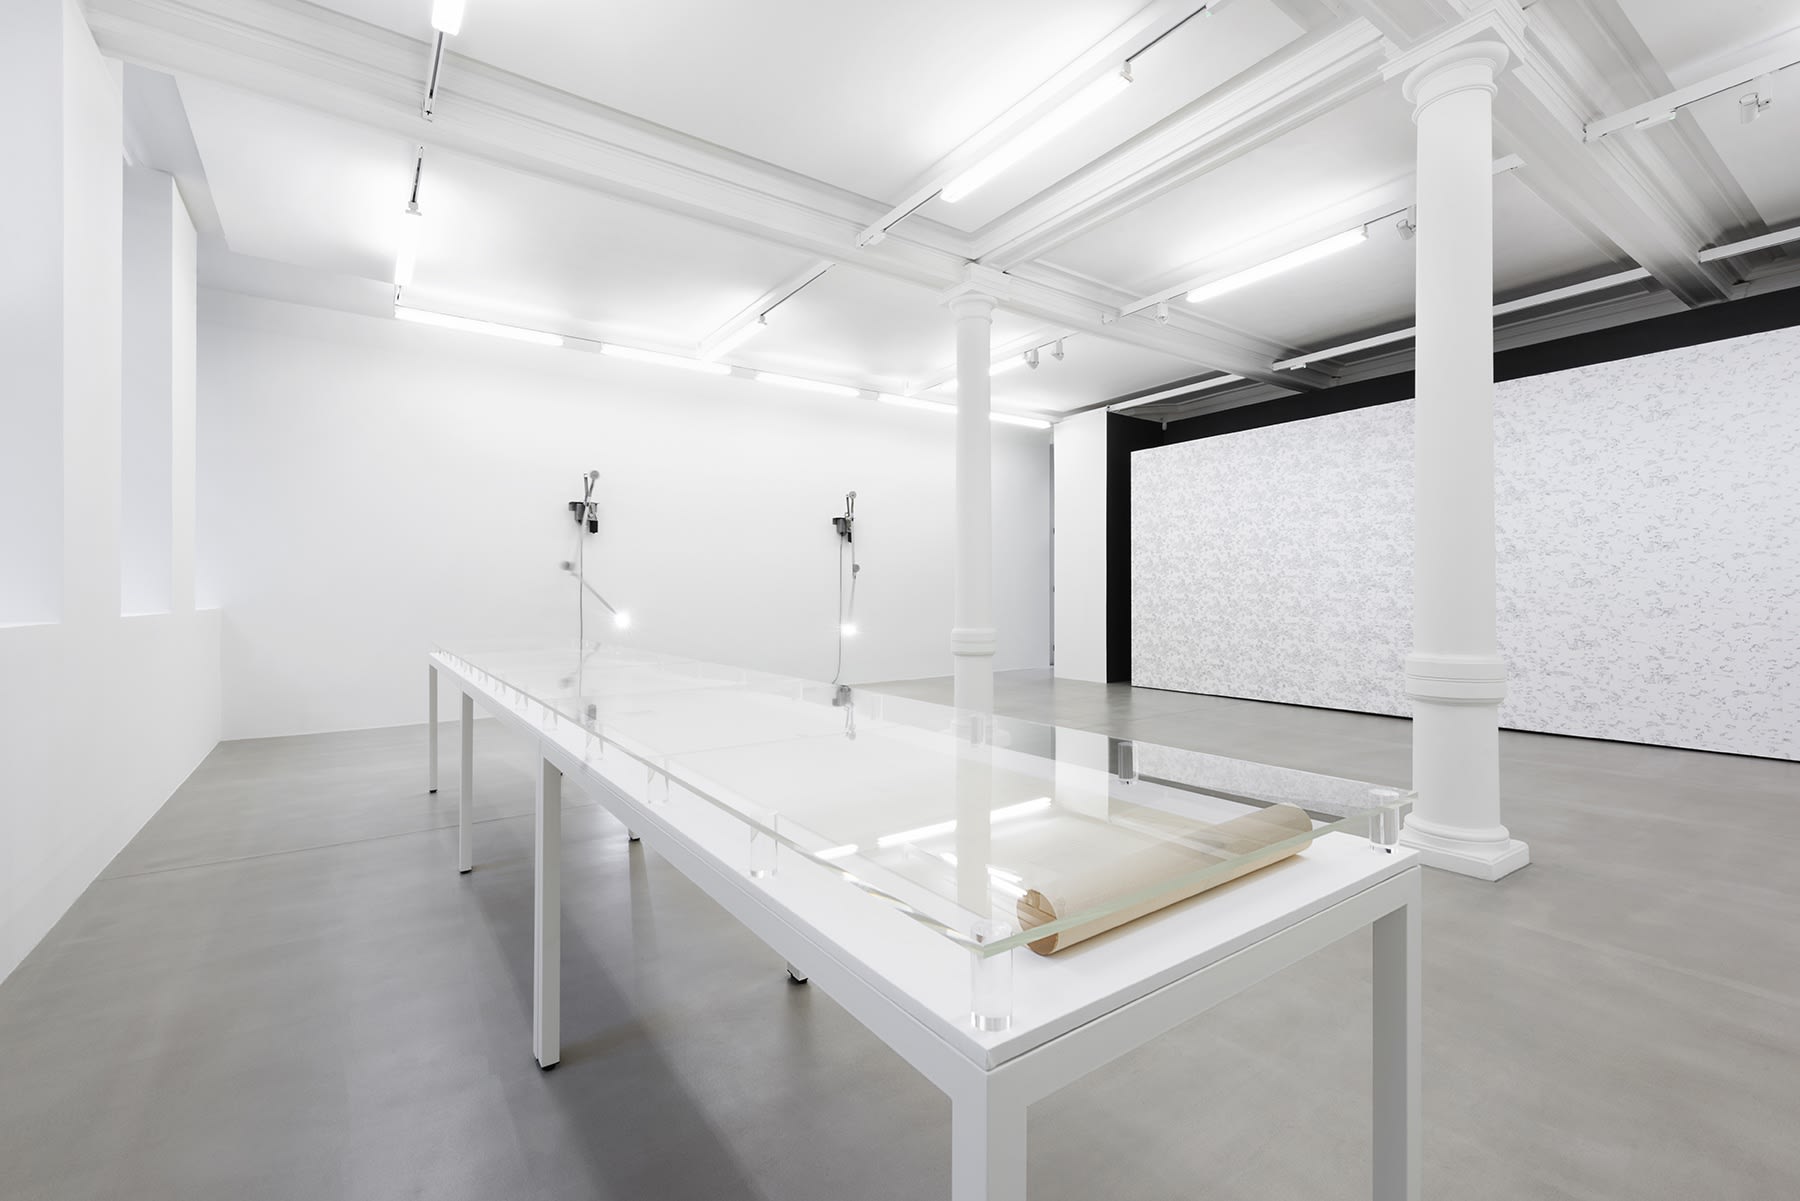 2 lights point to a long white display table in a white gallery space with columns.